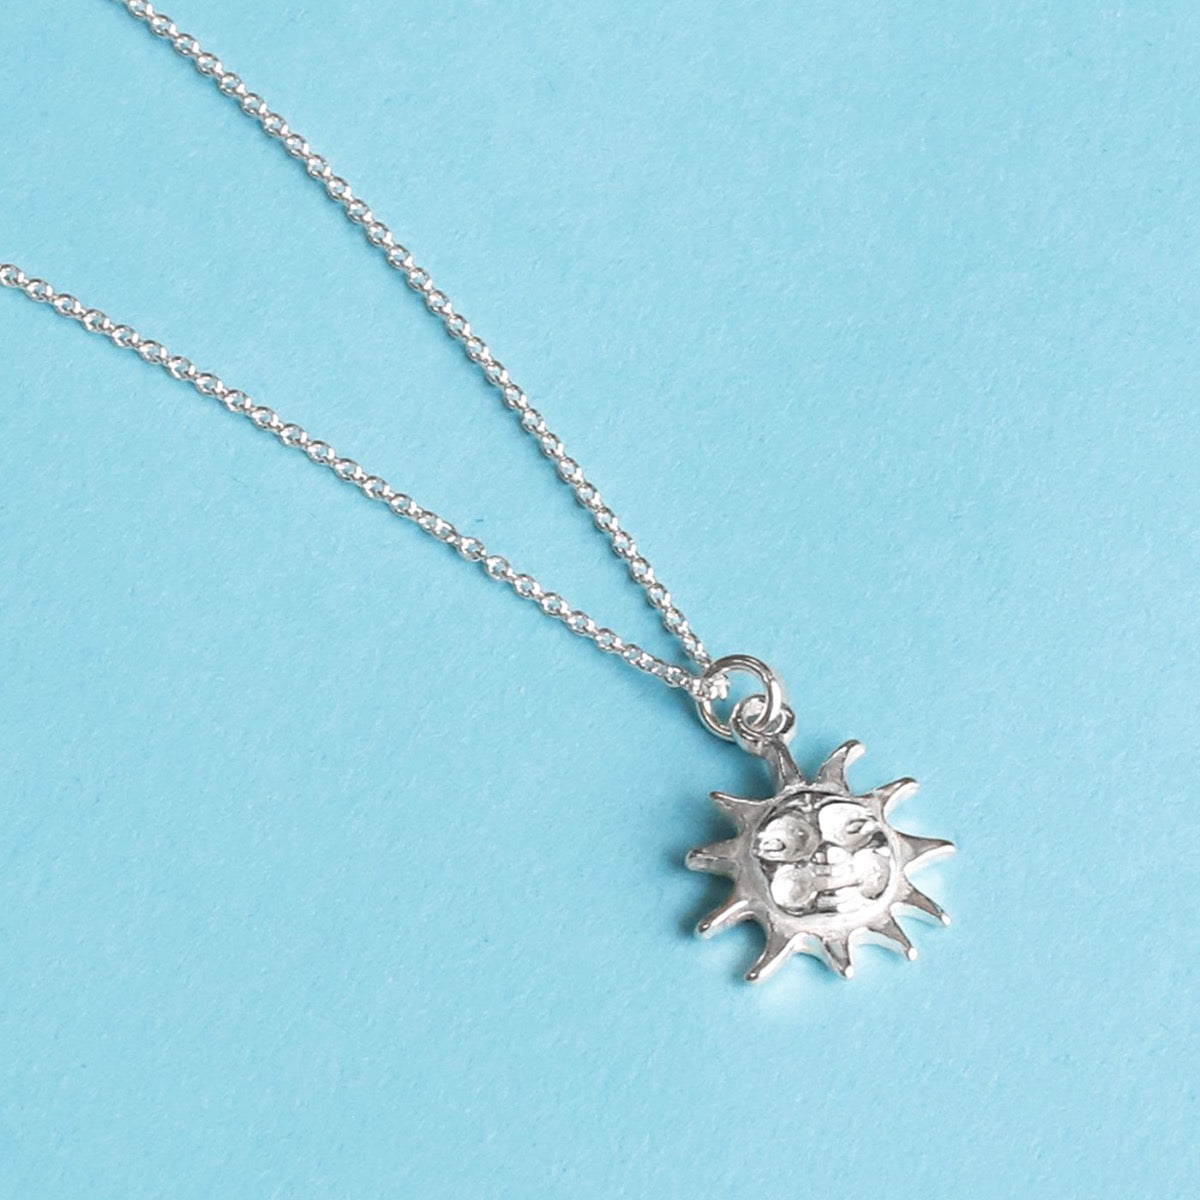 Sun Necklace 925 Sterling Silver,birthday Gift,women Necklace,sun Pendant,dainty  Necklace,gift for Her,charity Shop - Etsy